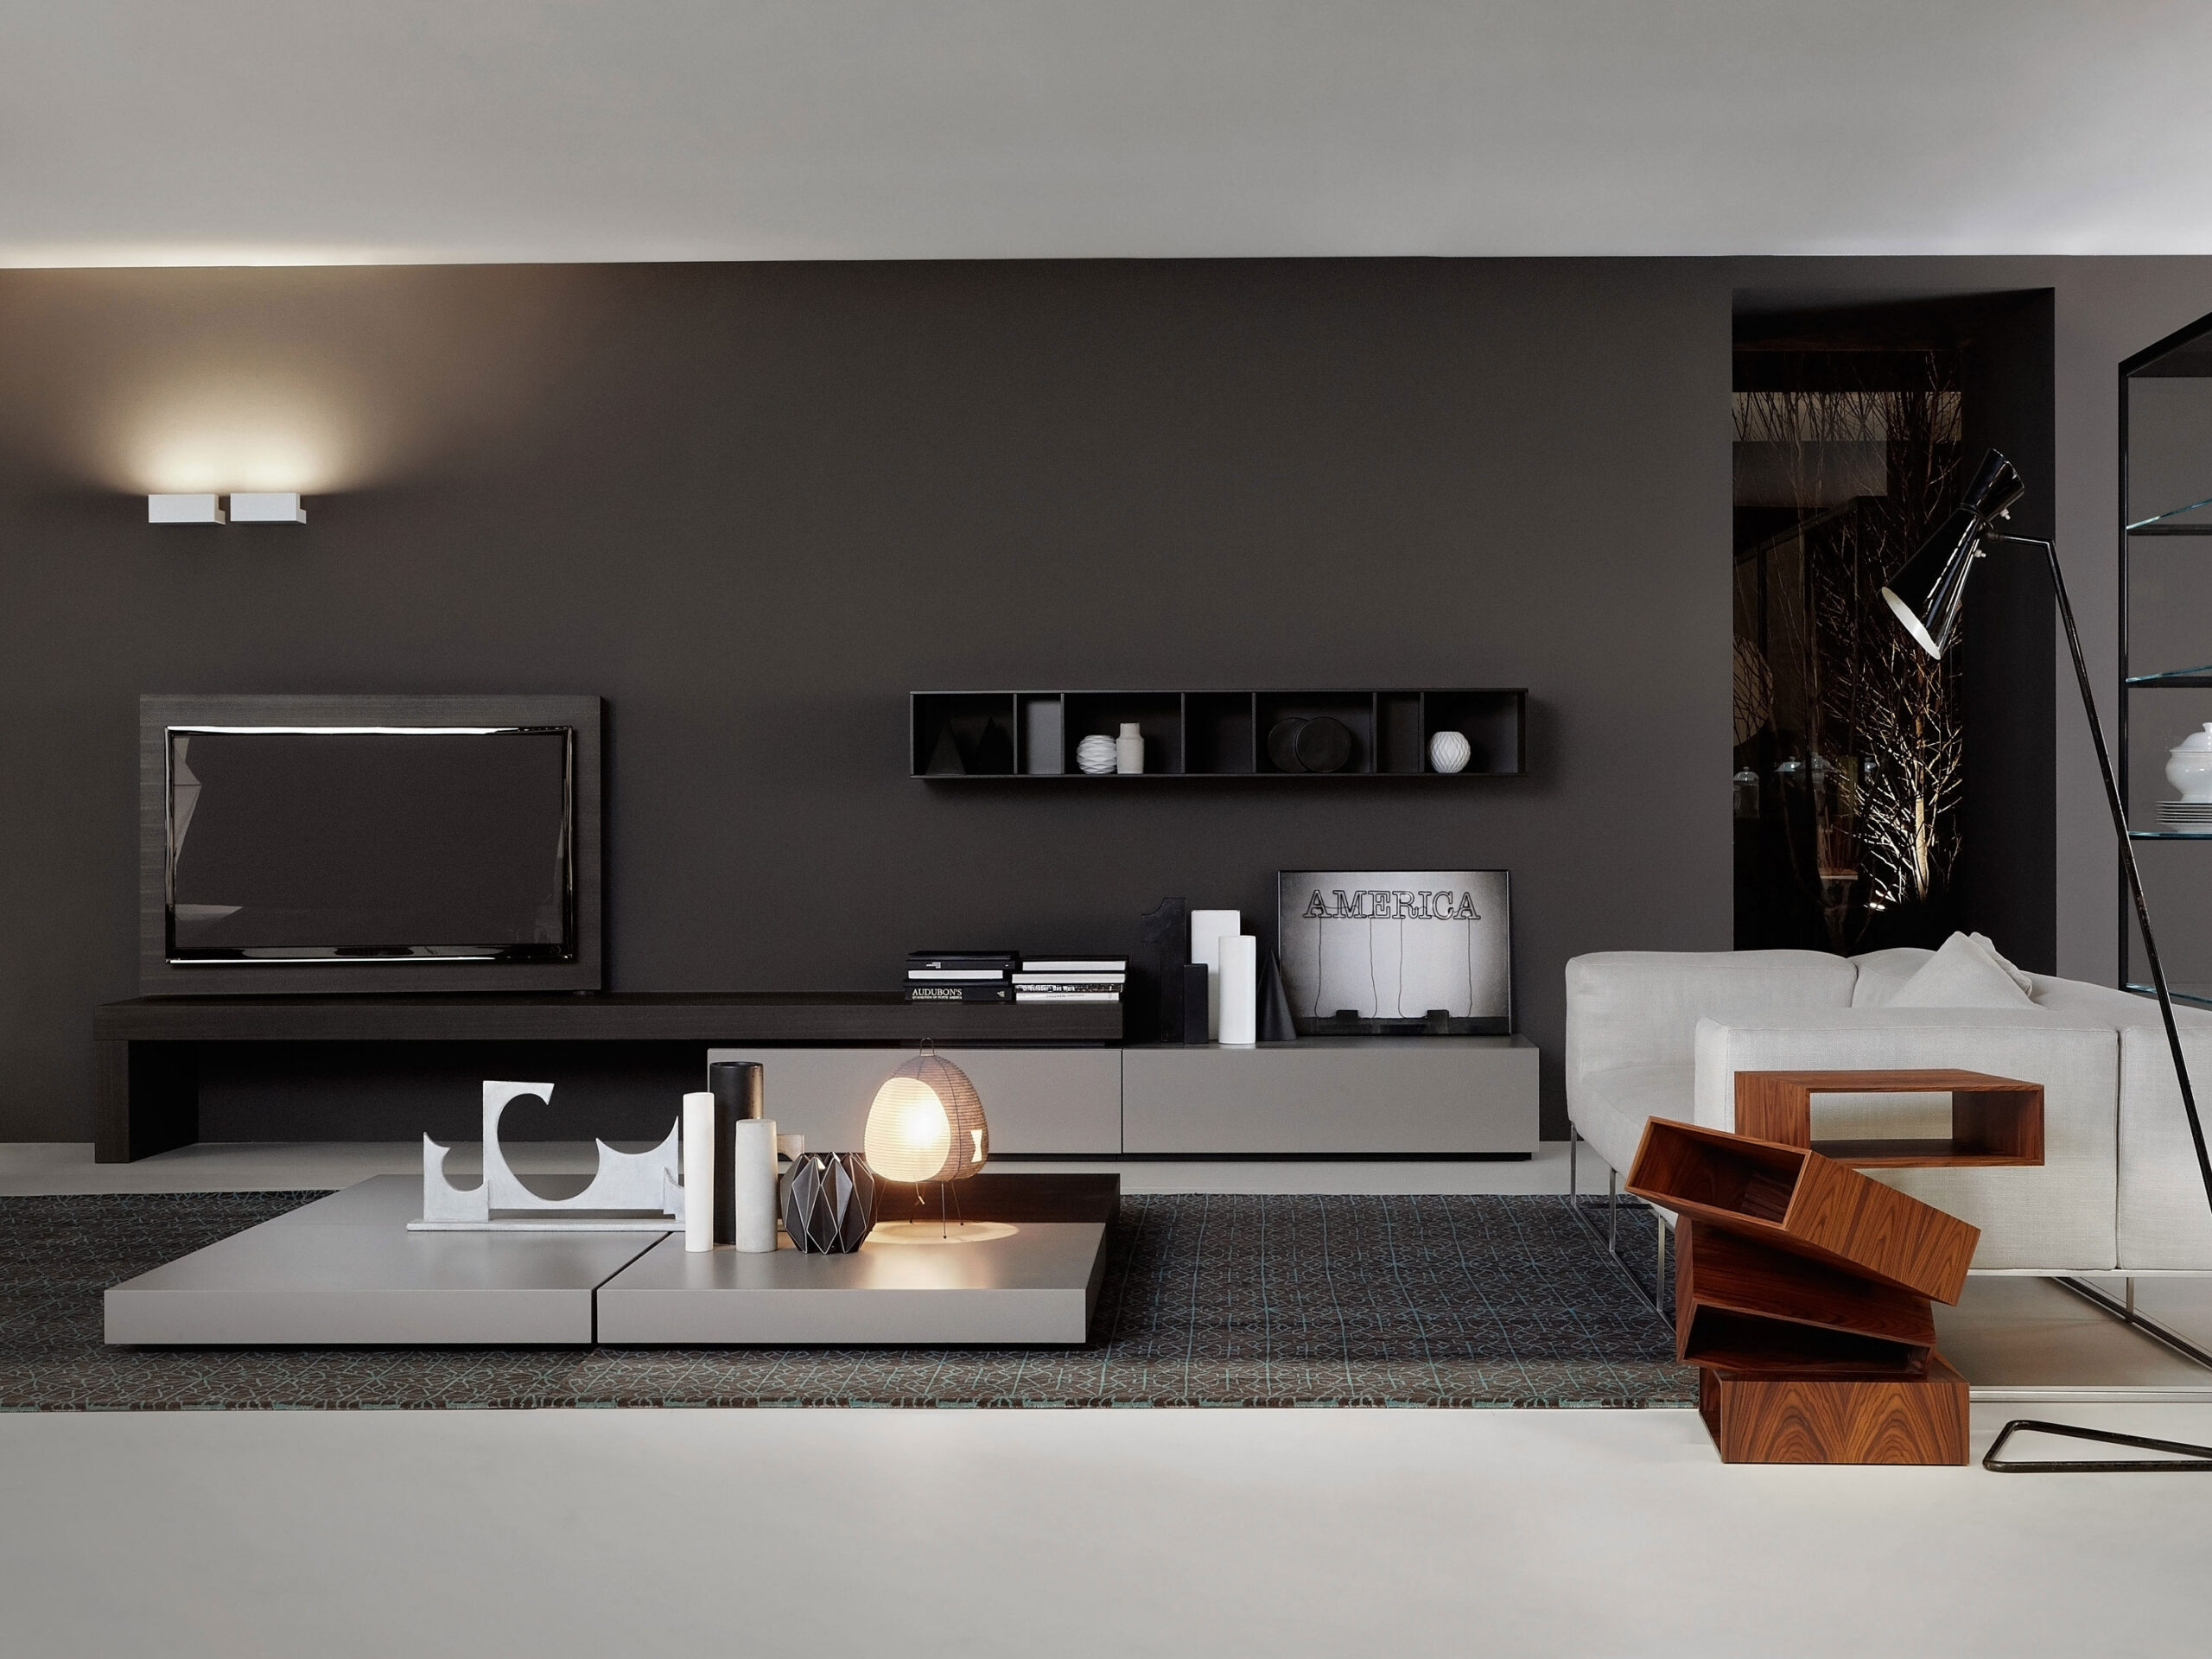 - furniture but design-oriented TV also practical, not only